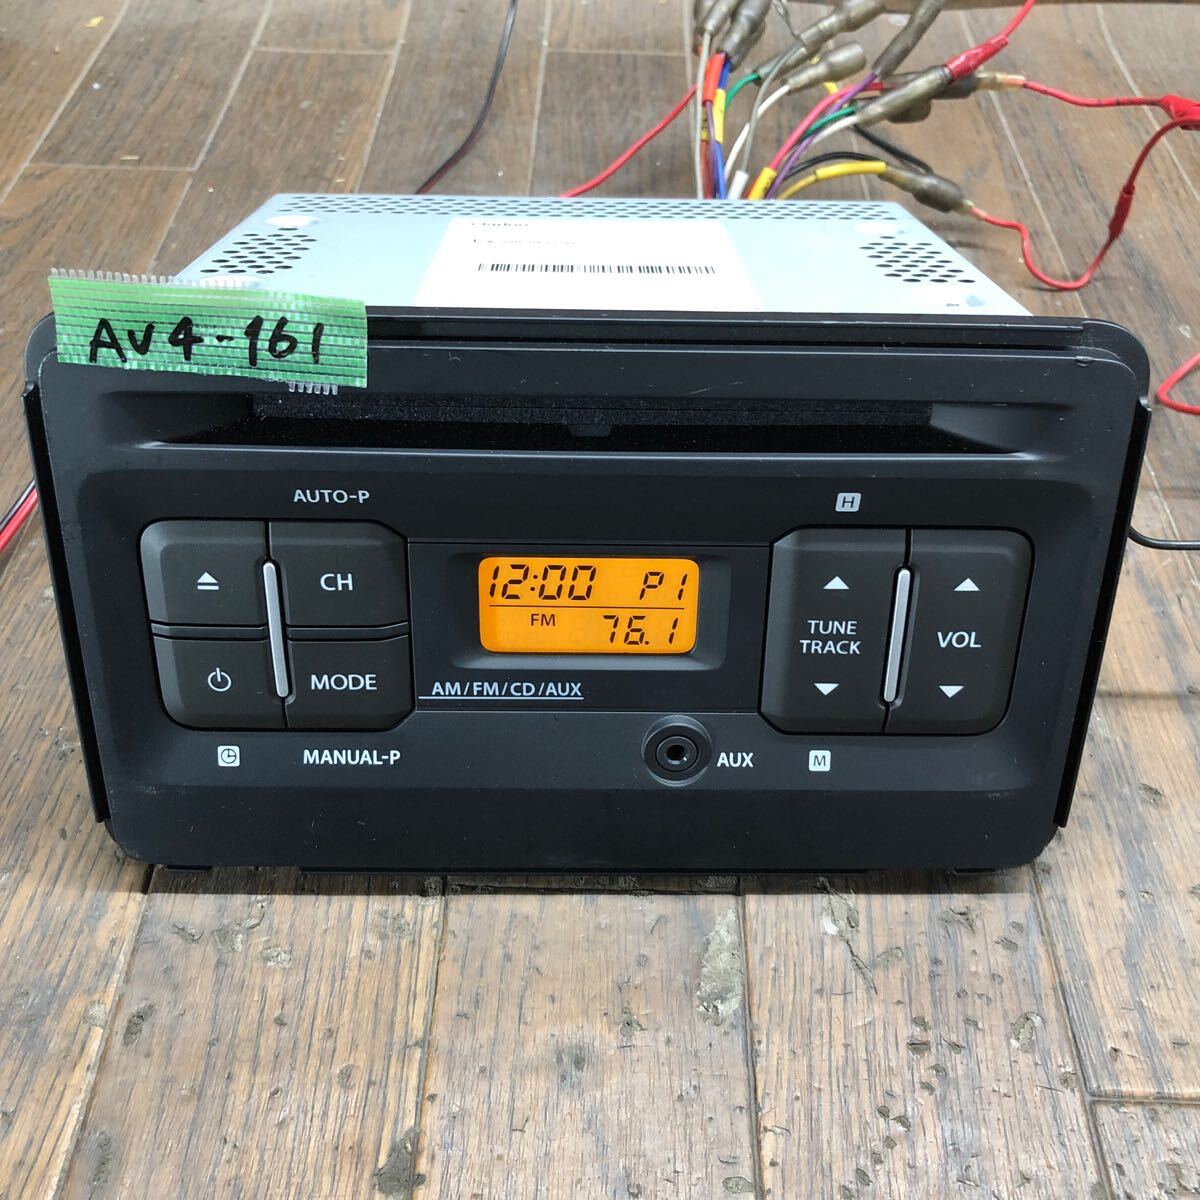 AV4-161 super-discount car stereo CD player SUZUKI clarion PS-3567 39101-63R00 9057710 CD FM/AM body only simple operation verification ending used present condition goods 